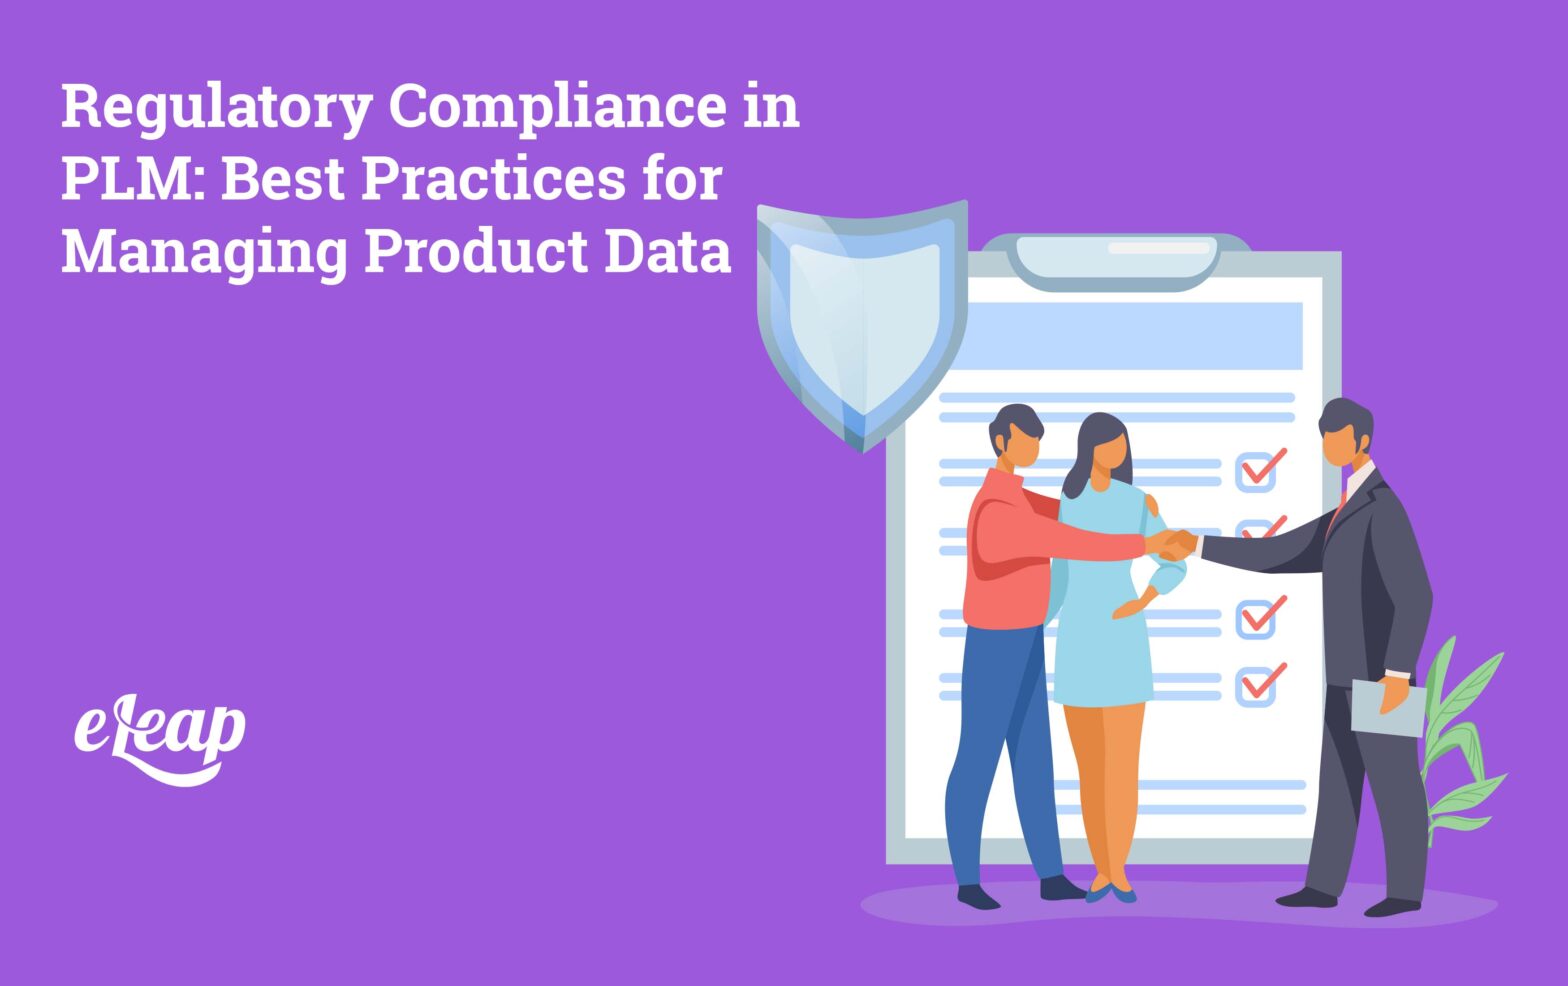 Regulatory Compliance in PLM: Best Practices for Managing Product Data